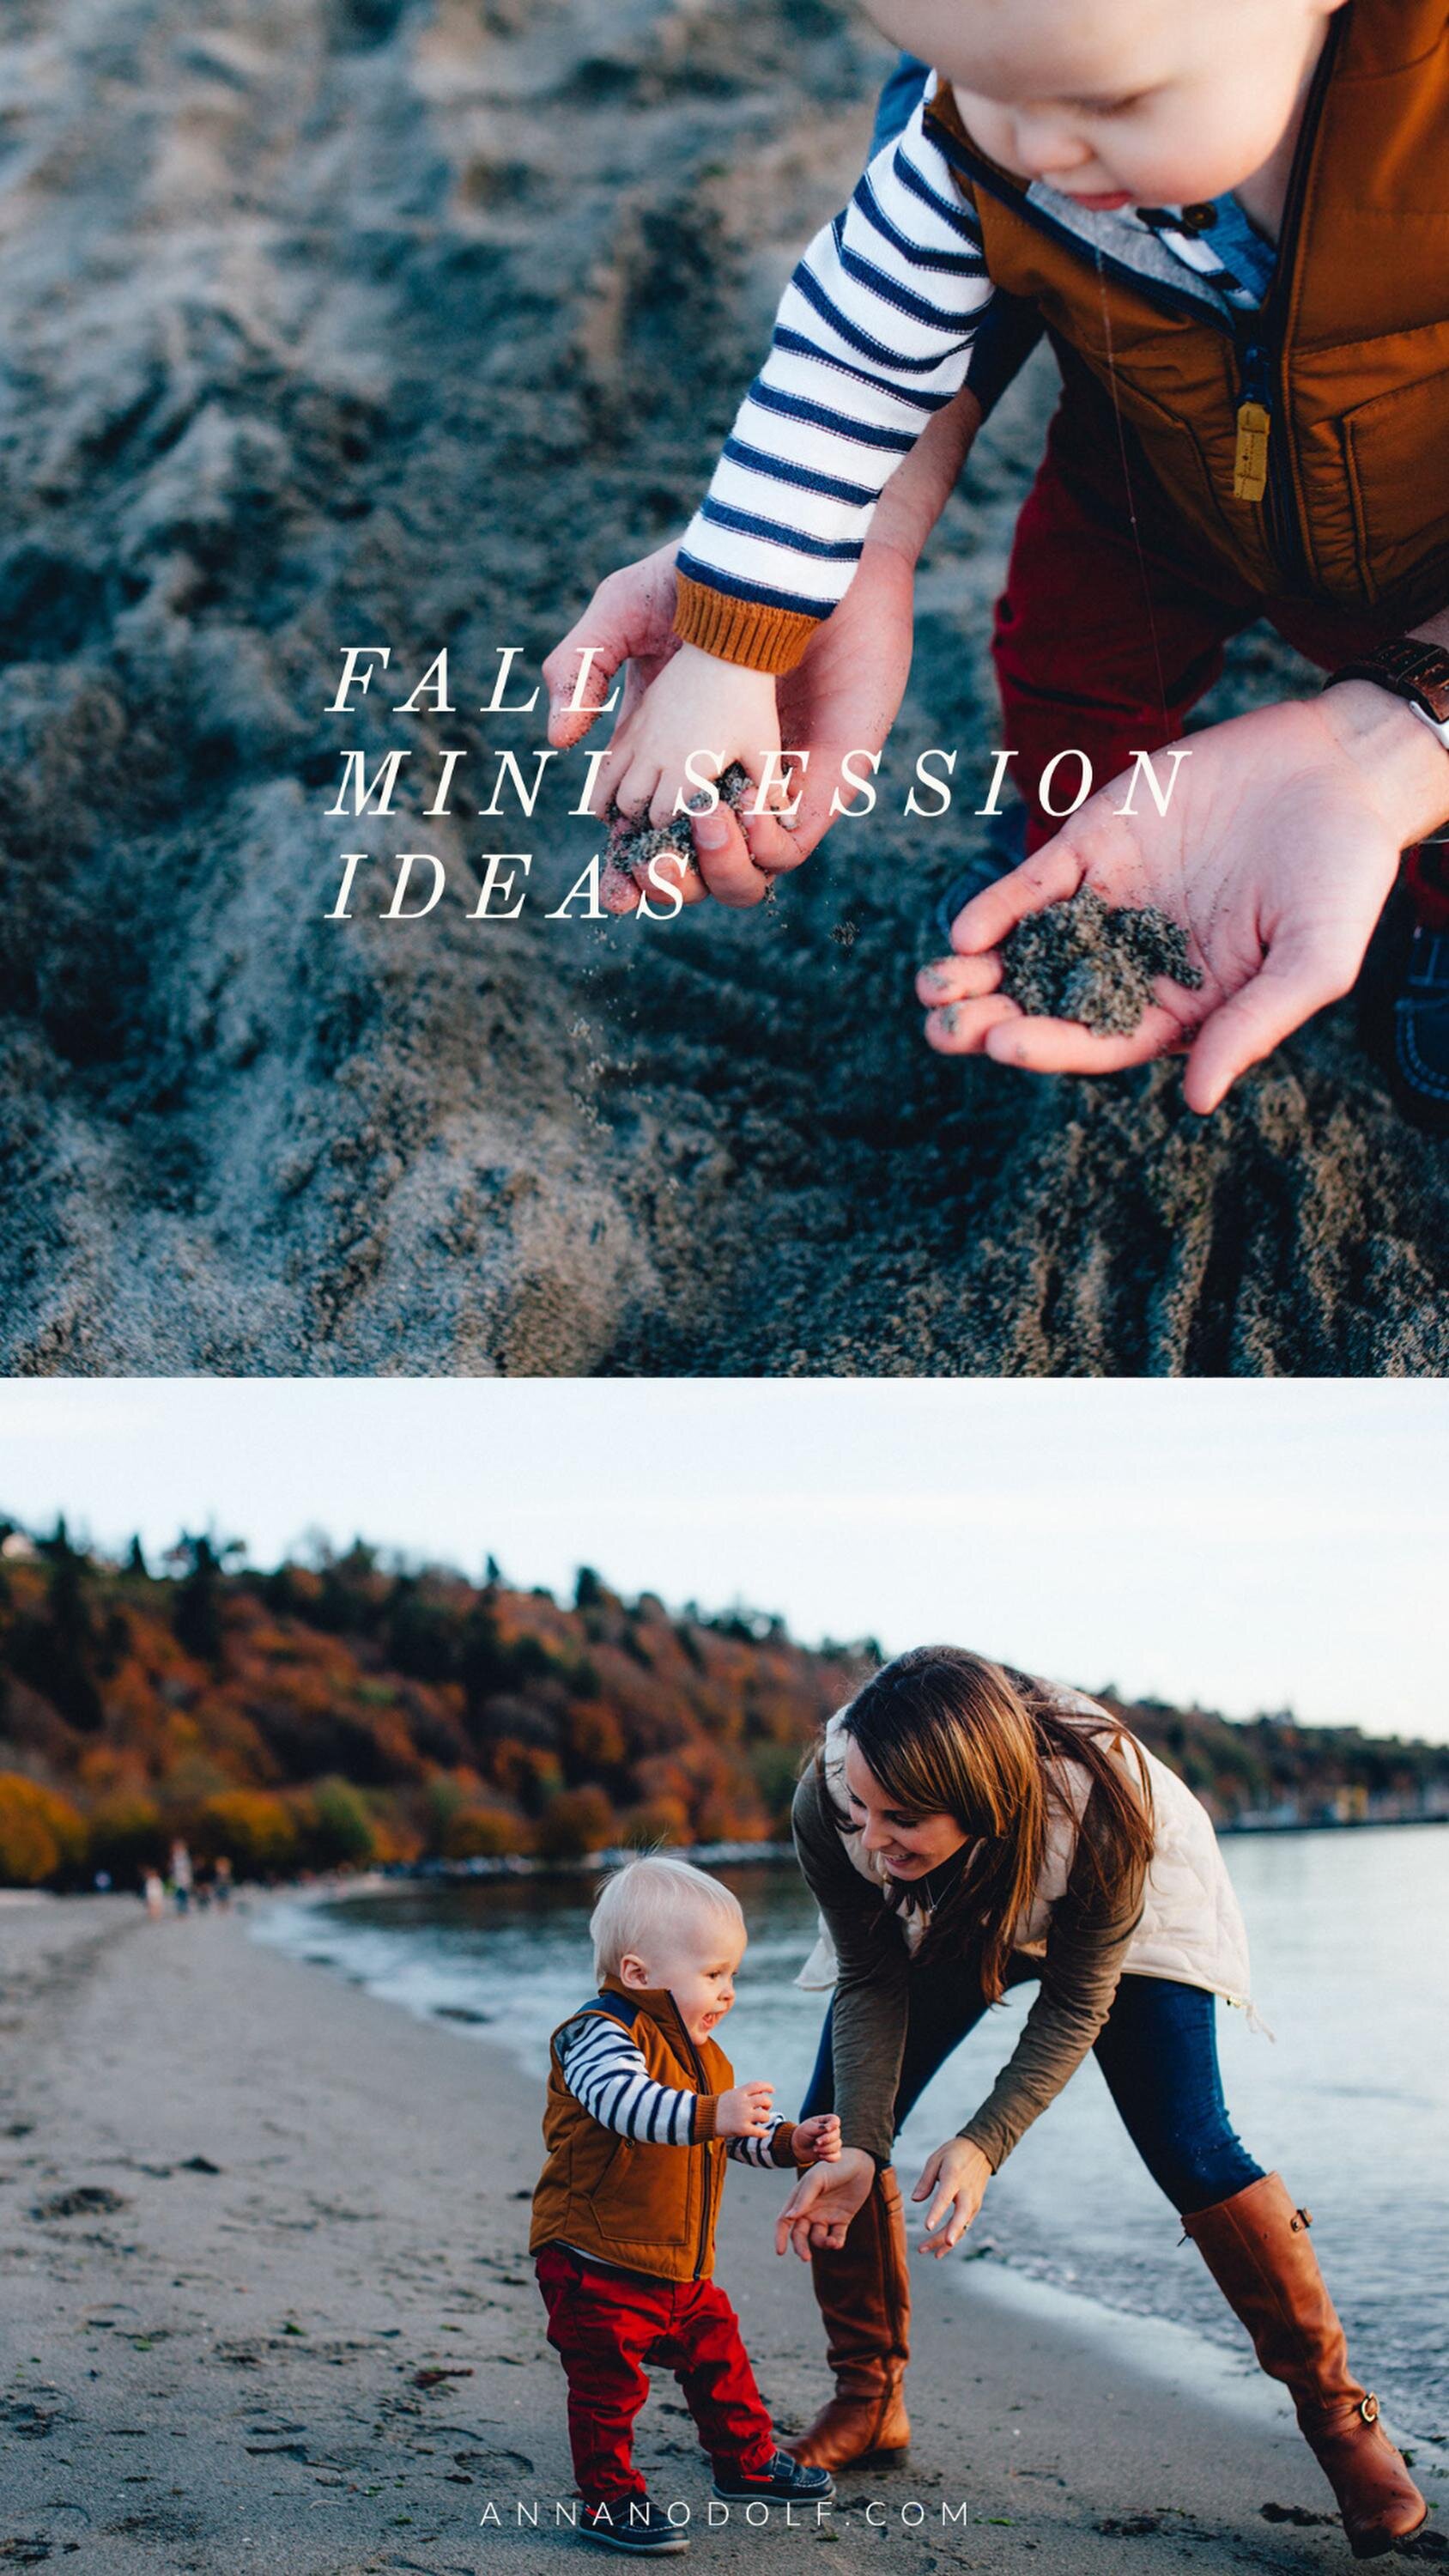 seattle lifestyle photographer - the best mini sessions in seattle (Copy)